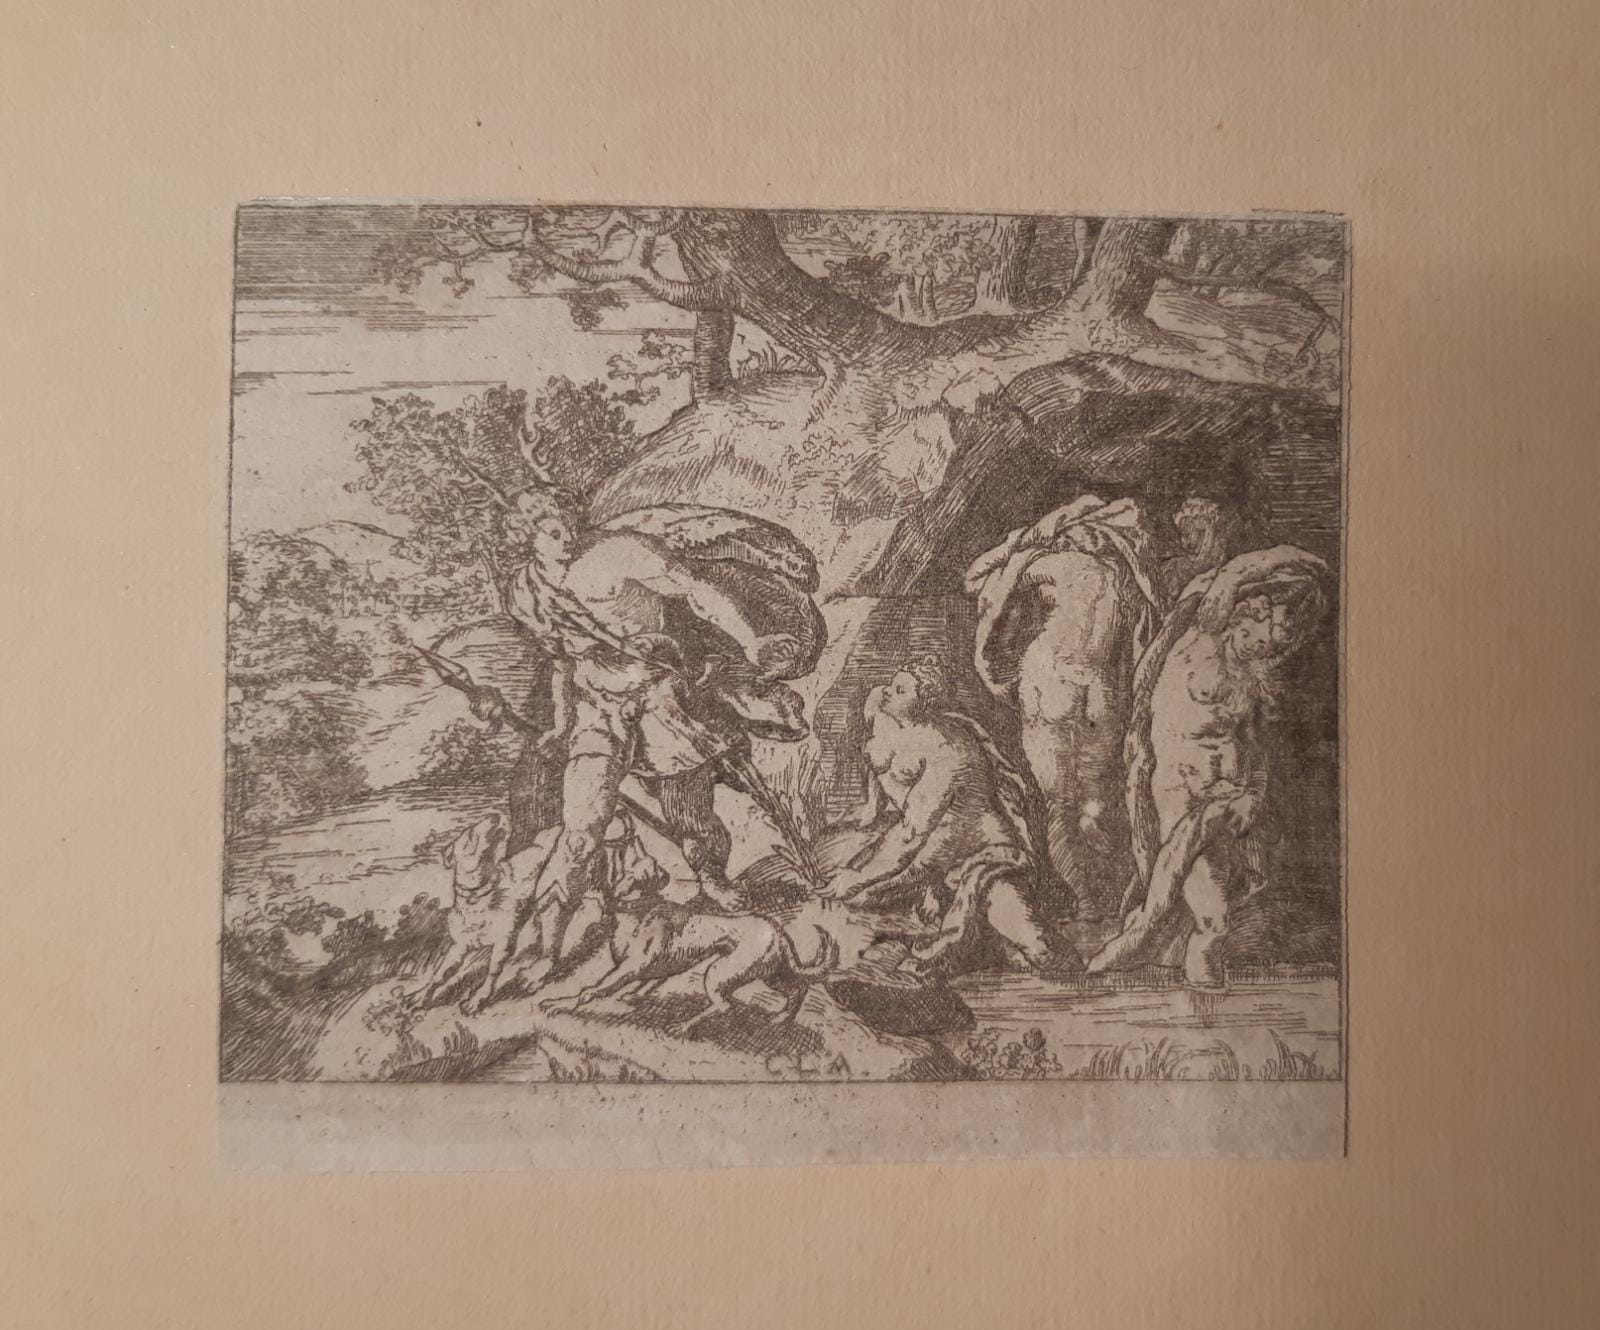 [Antique print, etching] Diana and Actaeon, published 17th-century.